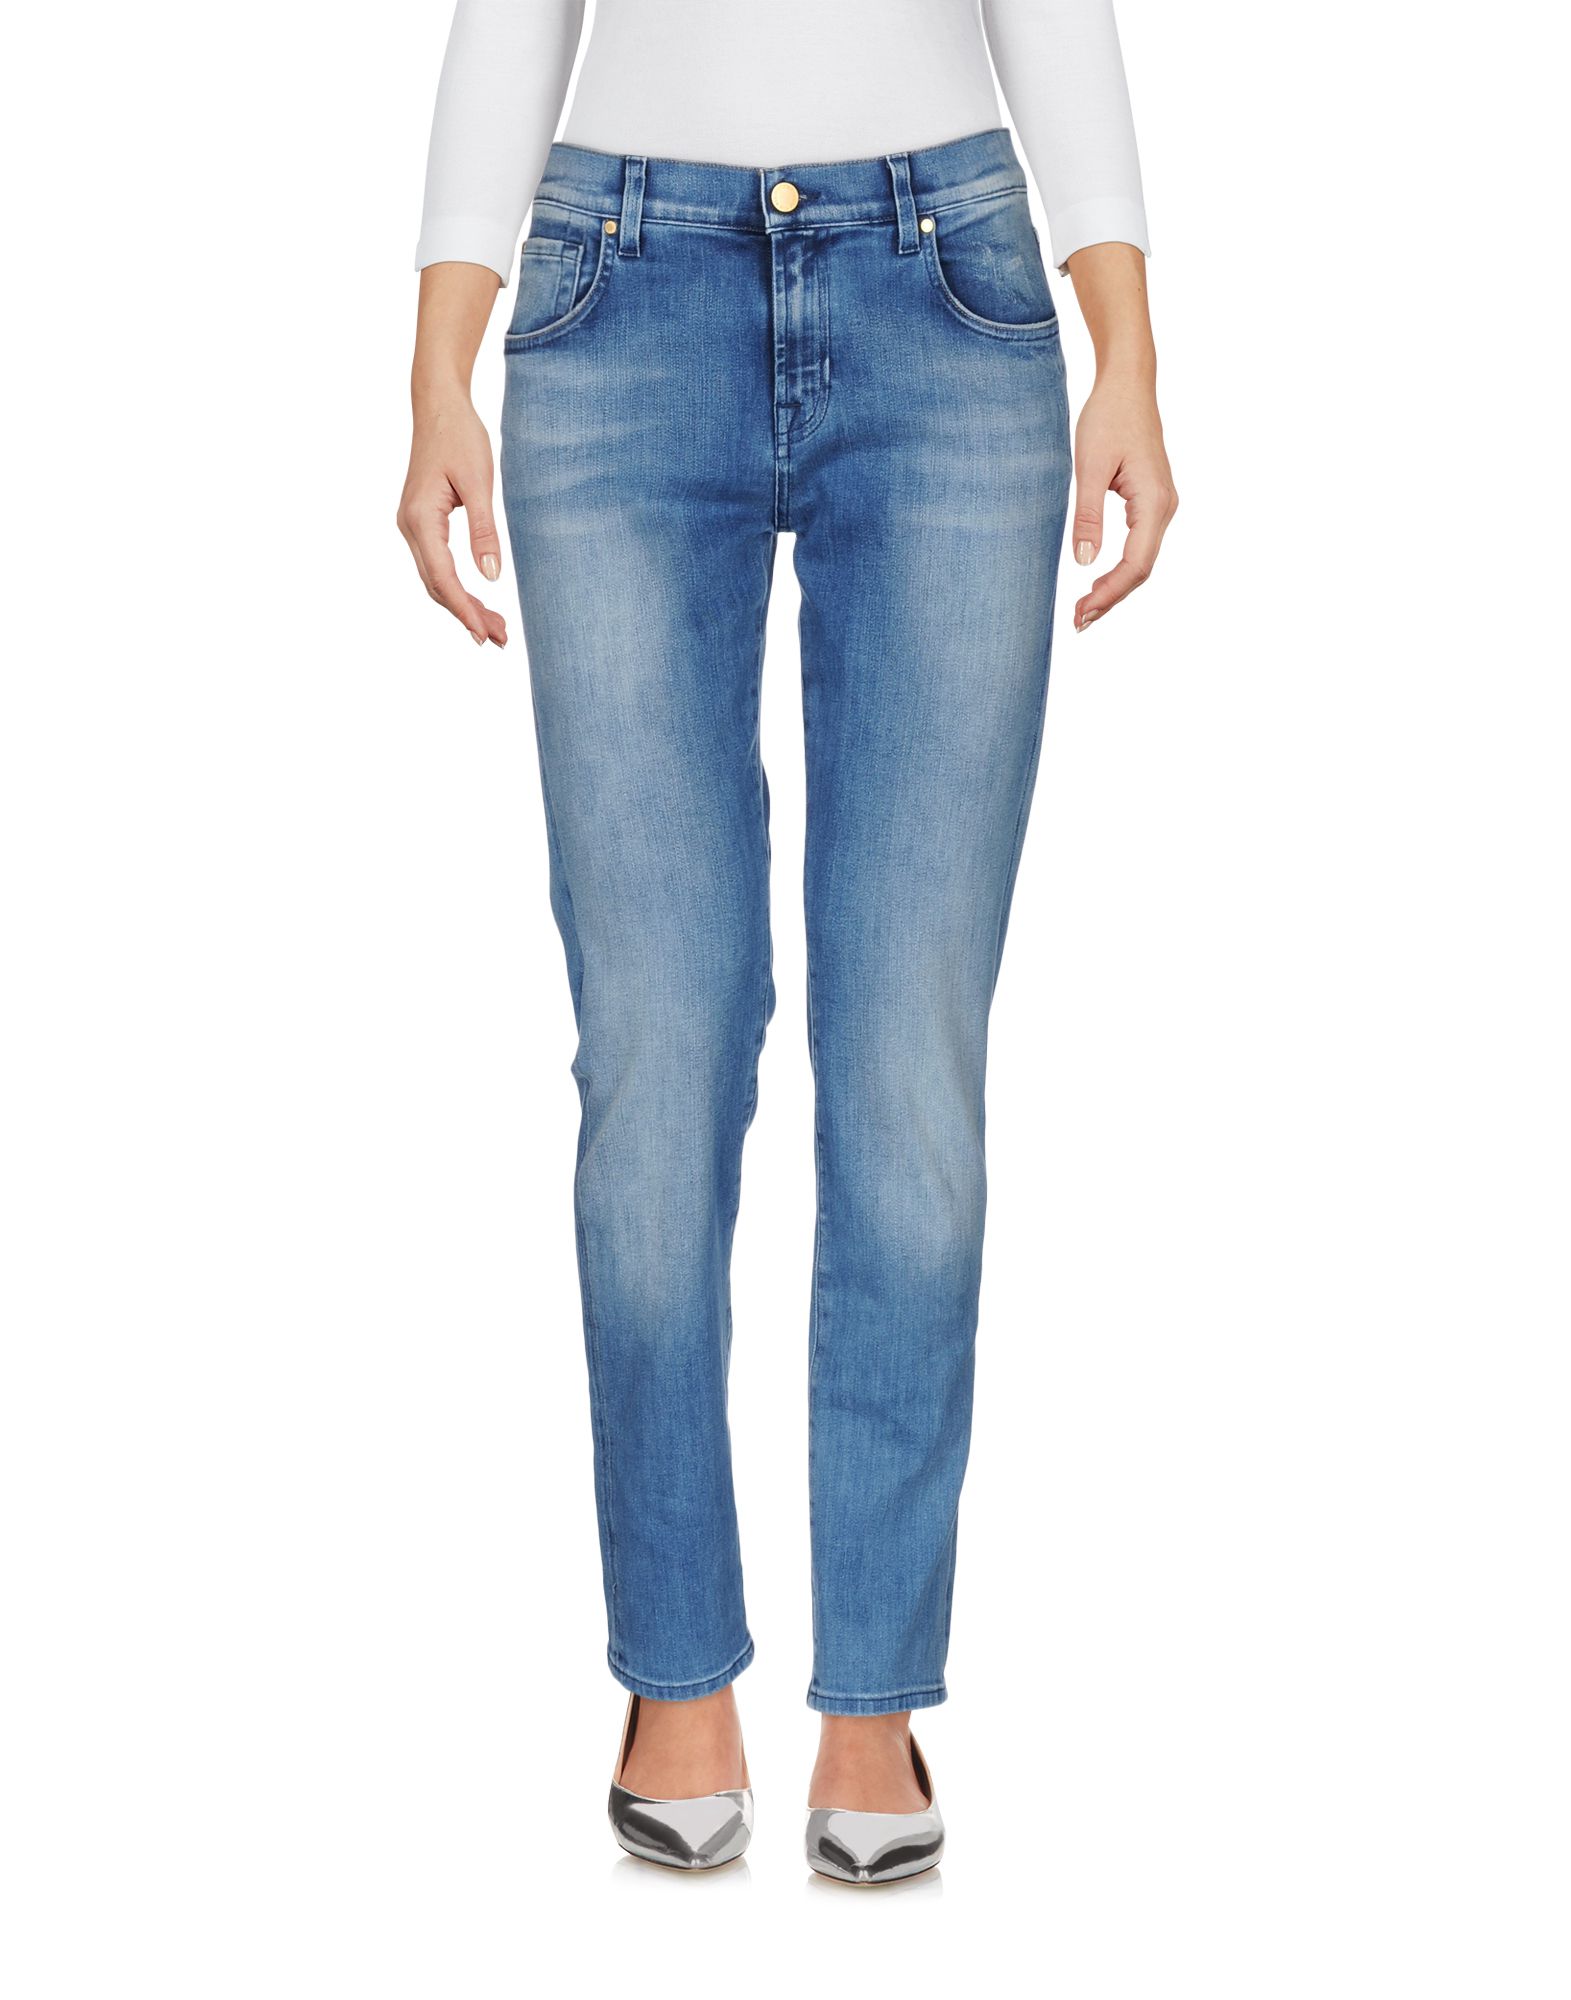 7 FOR ALL MANKIND Denim pants,42582610SF 2